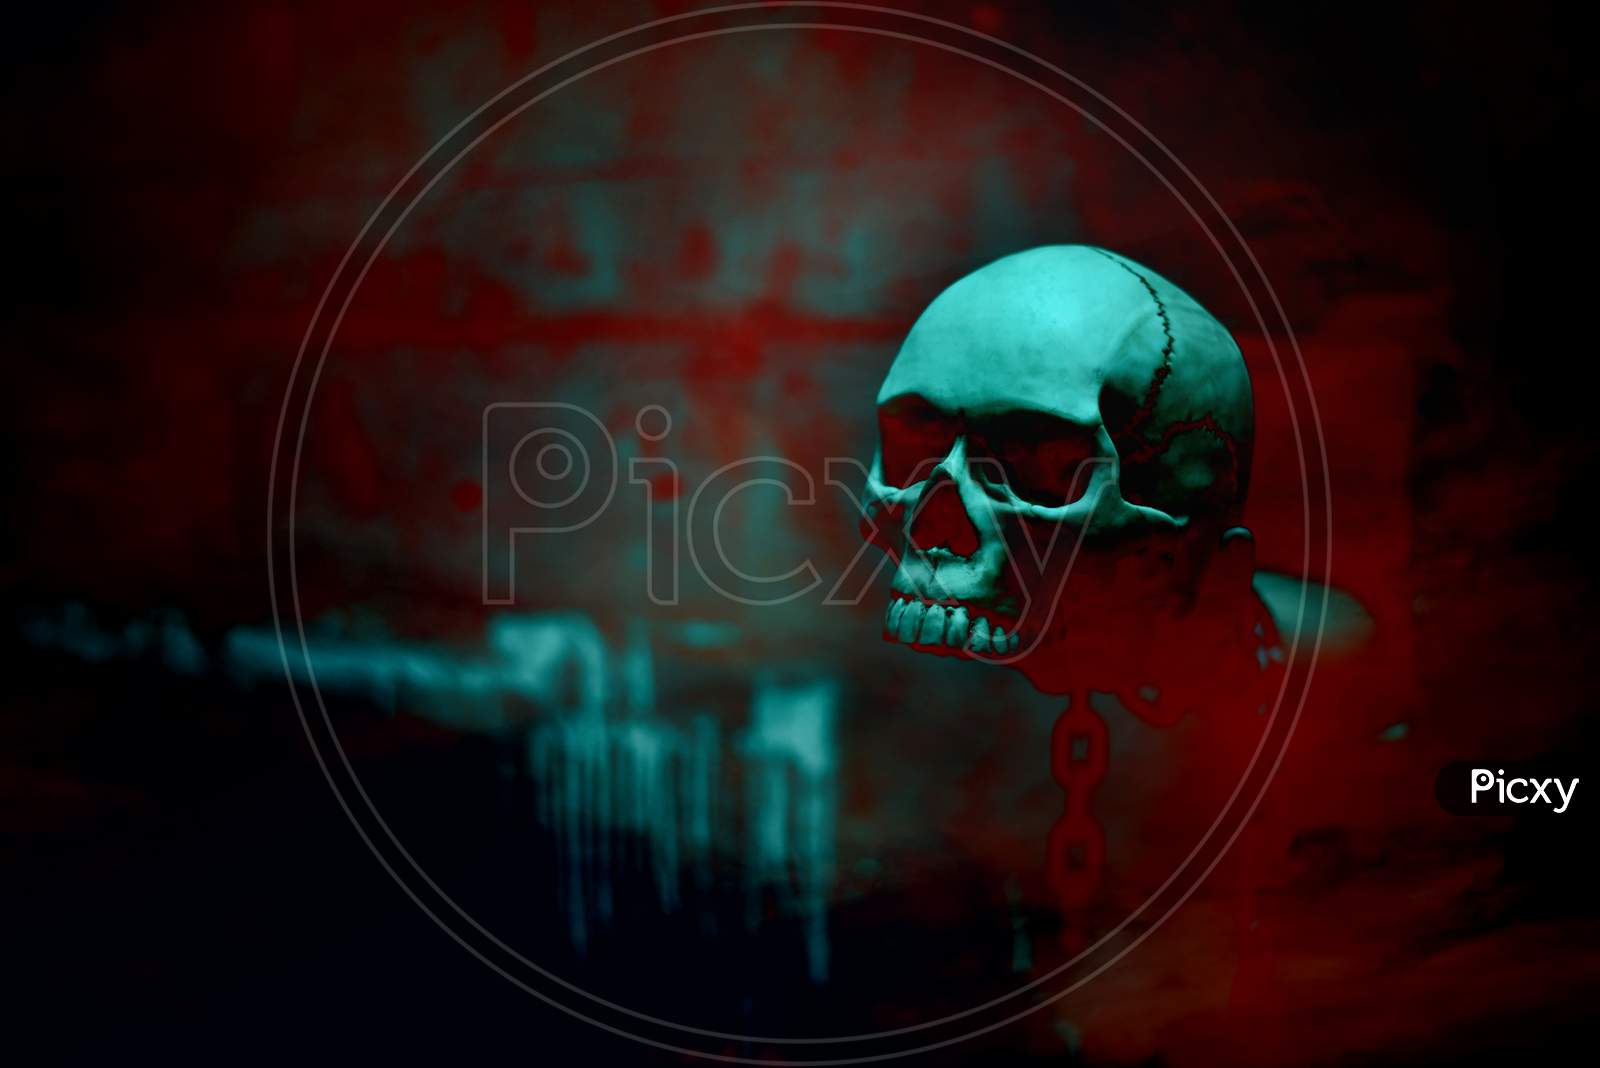 Skull Skeleton With Chain In Red Blood Background, Halloween'S Day Theme, Horror And Dark Film Tone, Scary And Screaming Concept, Ghost And Witch Concept. Poster For Holiday'S Festival Event.